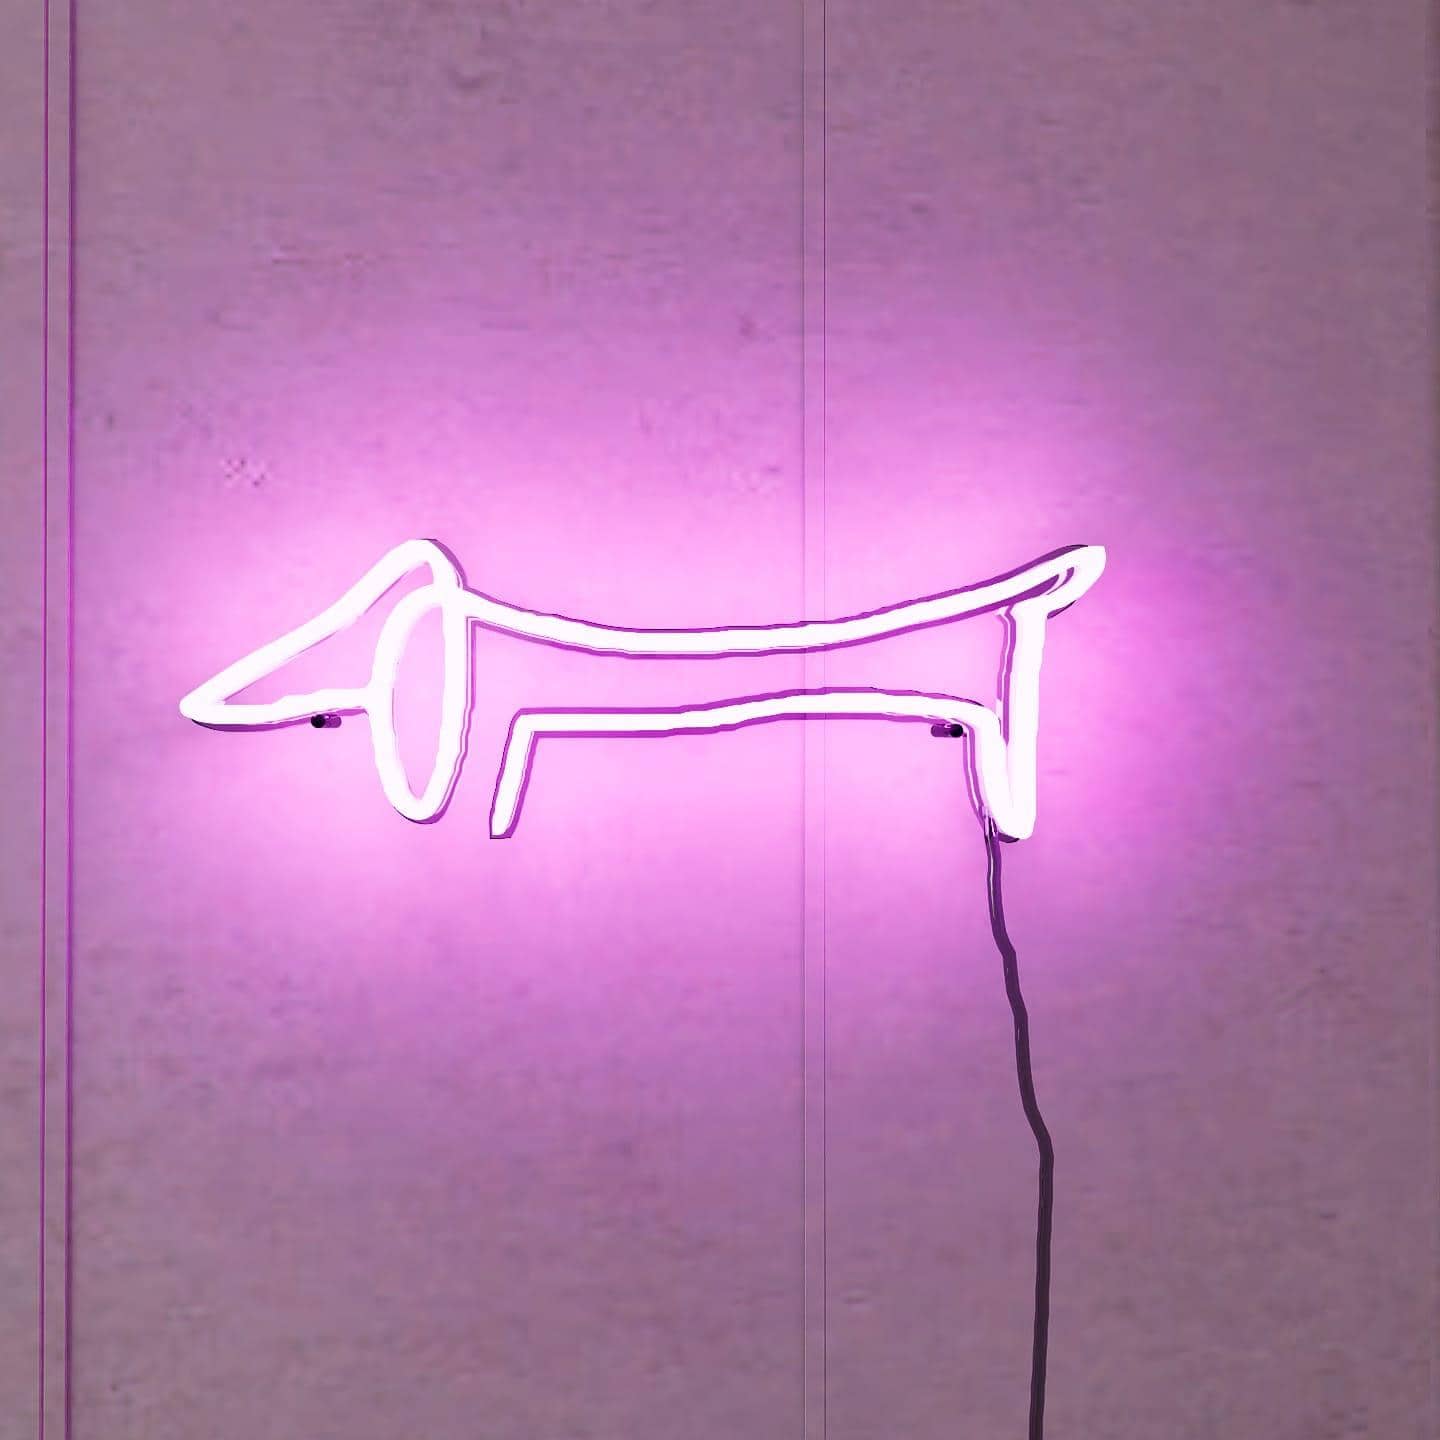 picasso-sketch-of-dachshund-hanging-on-wall-display-illuminated-at-night-pink